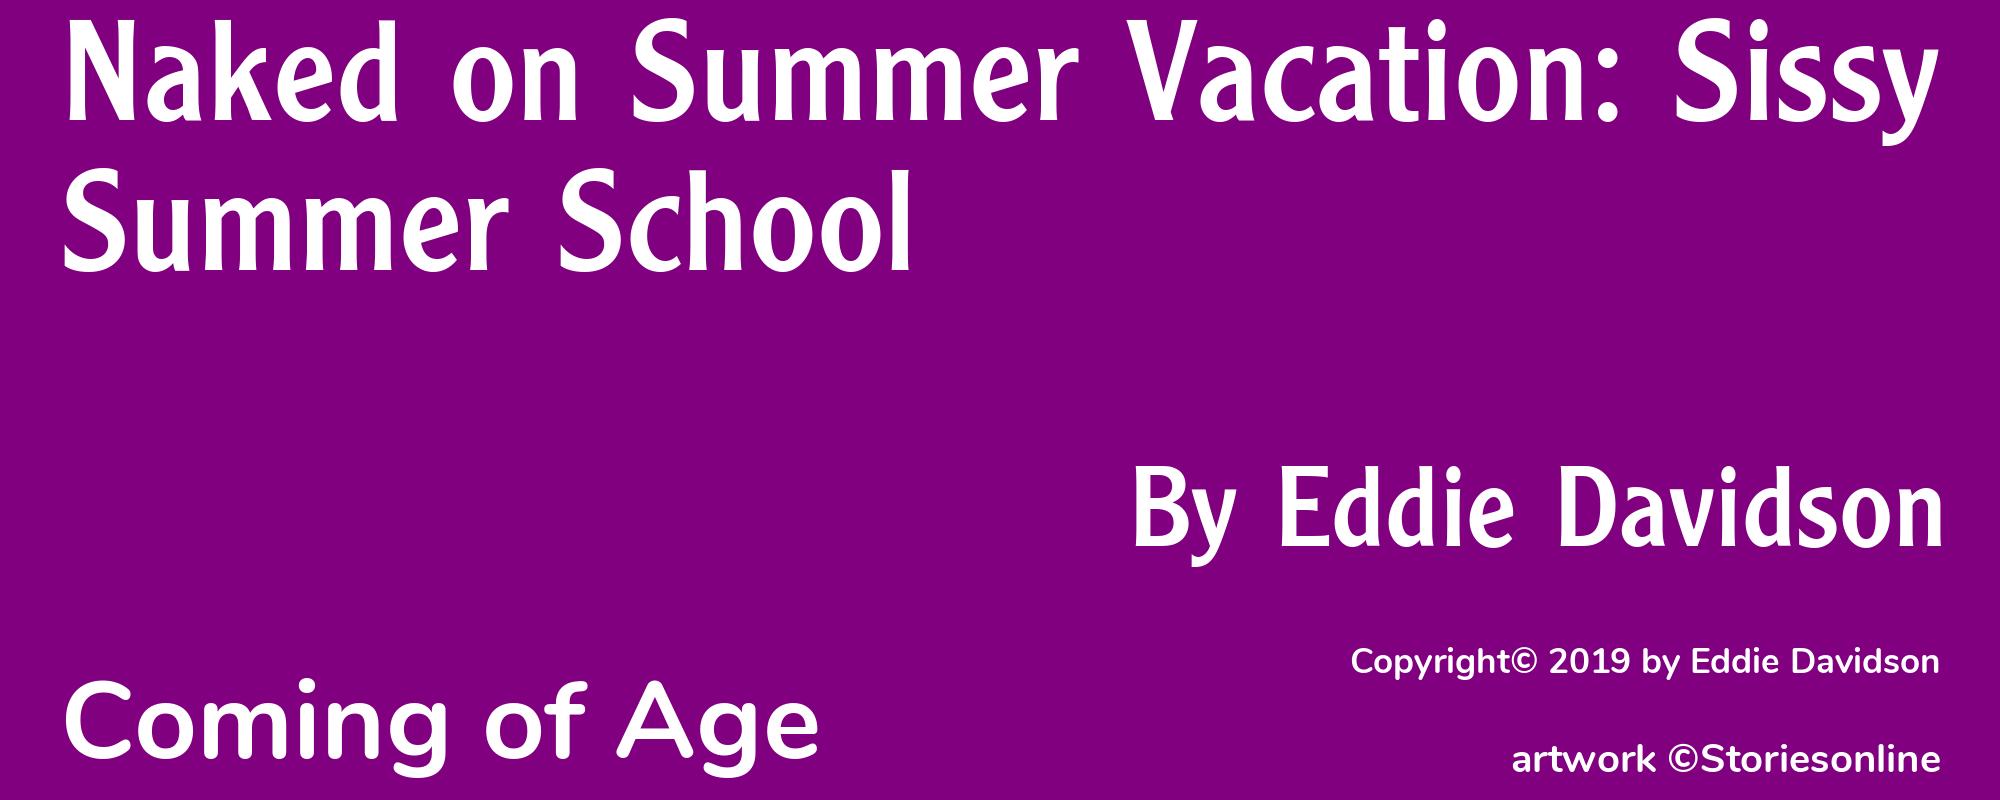 Naked on Summer Vacation: Sissy Summer School - Cover